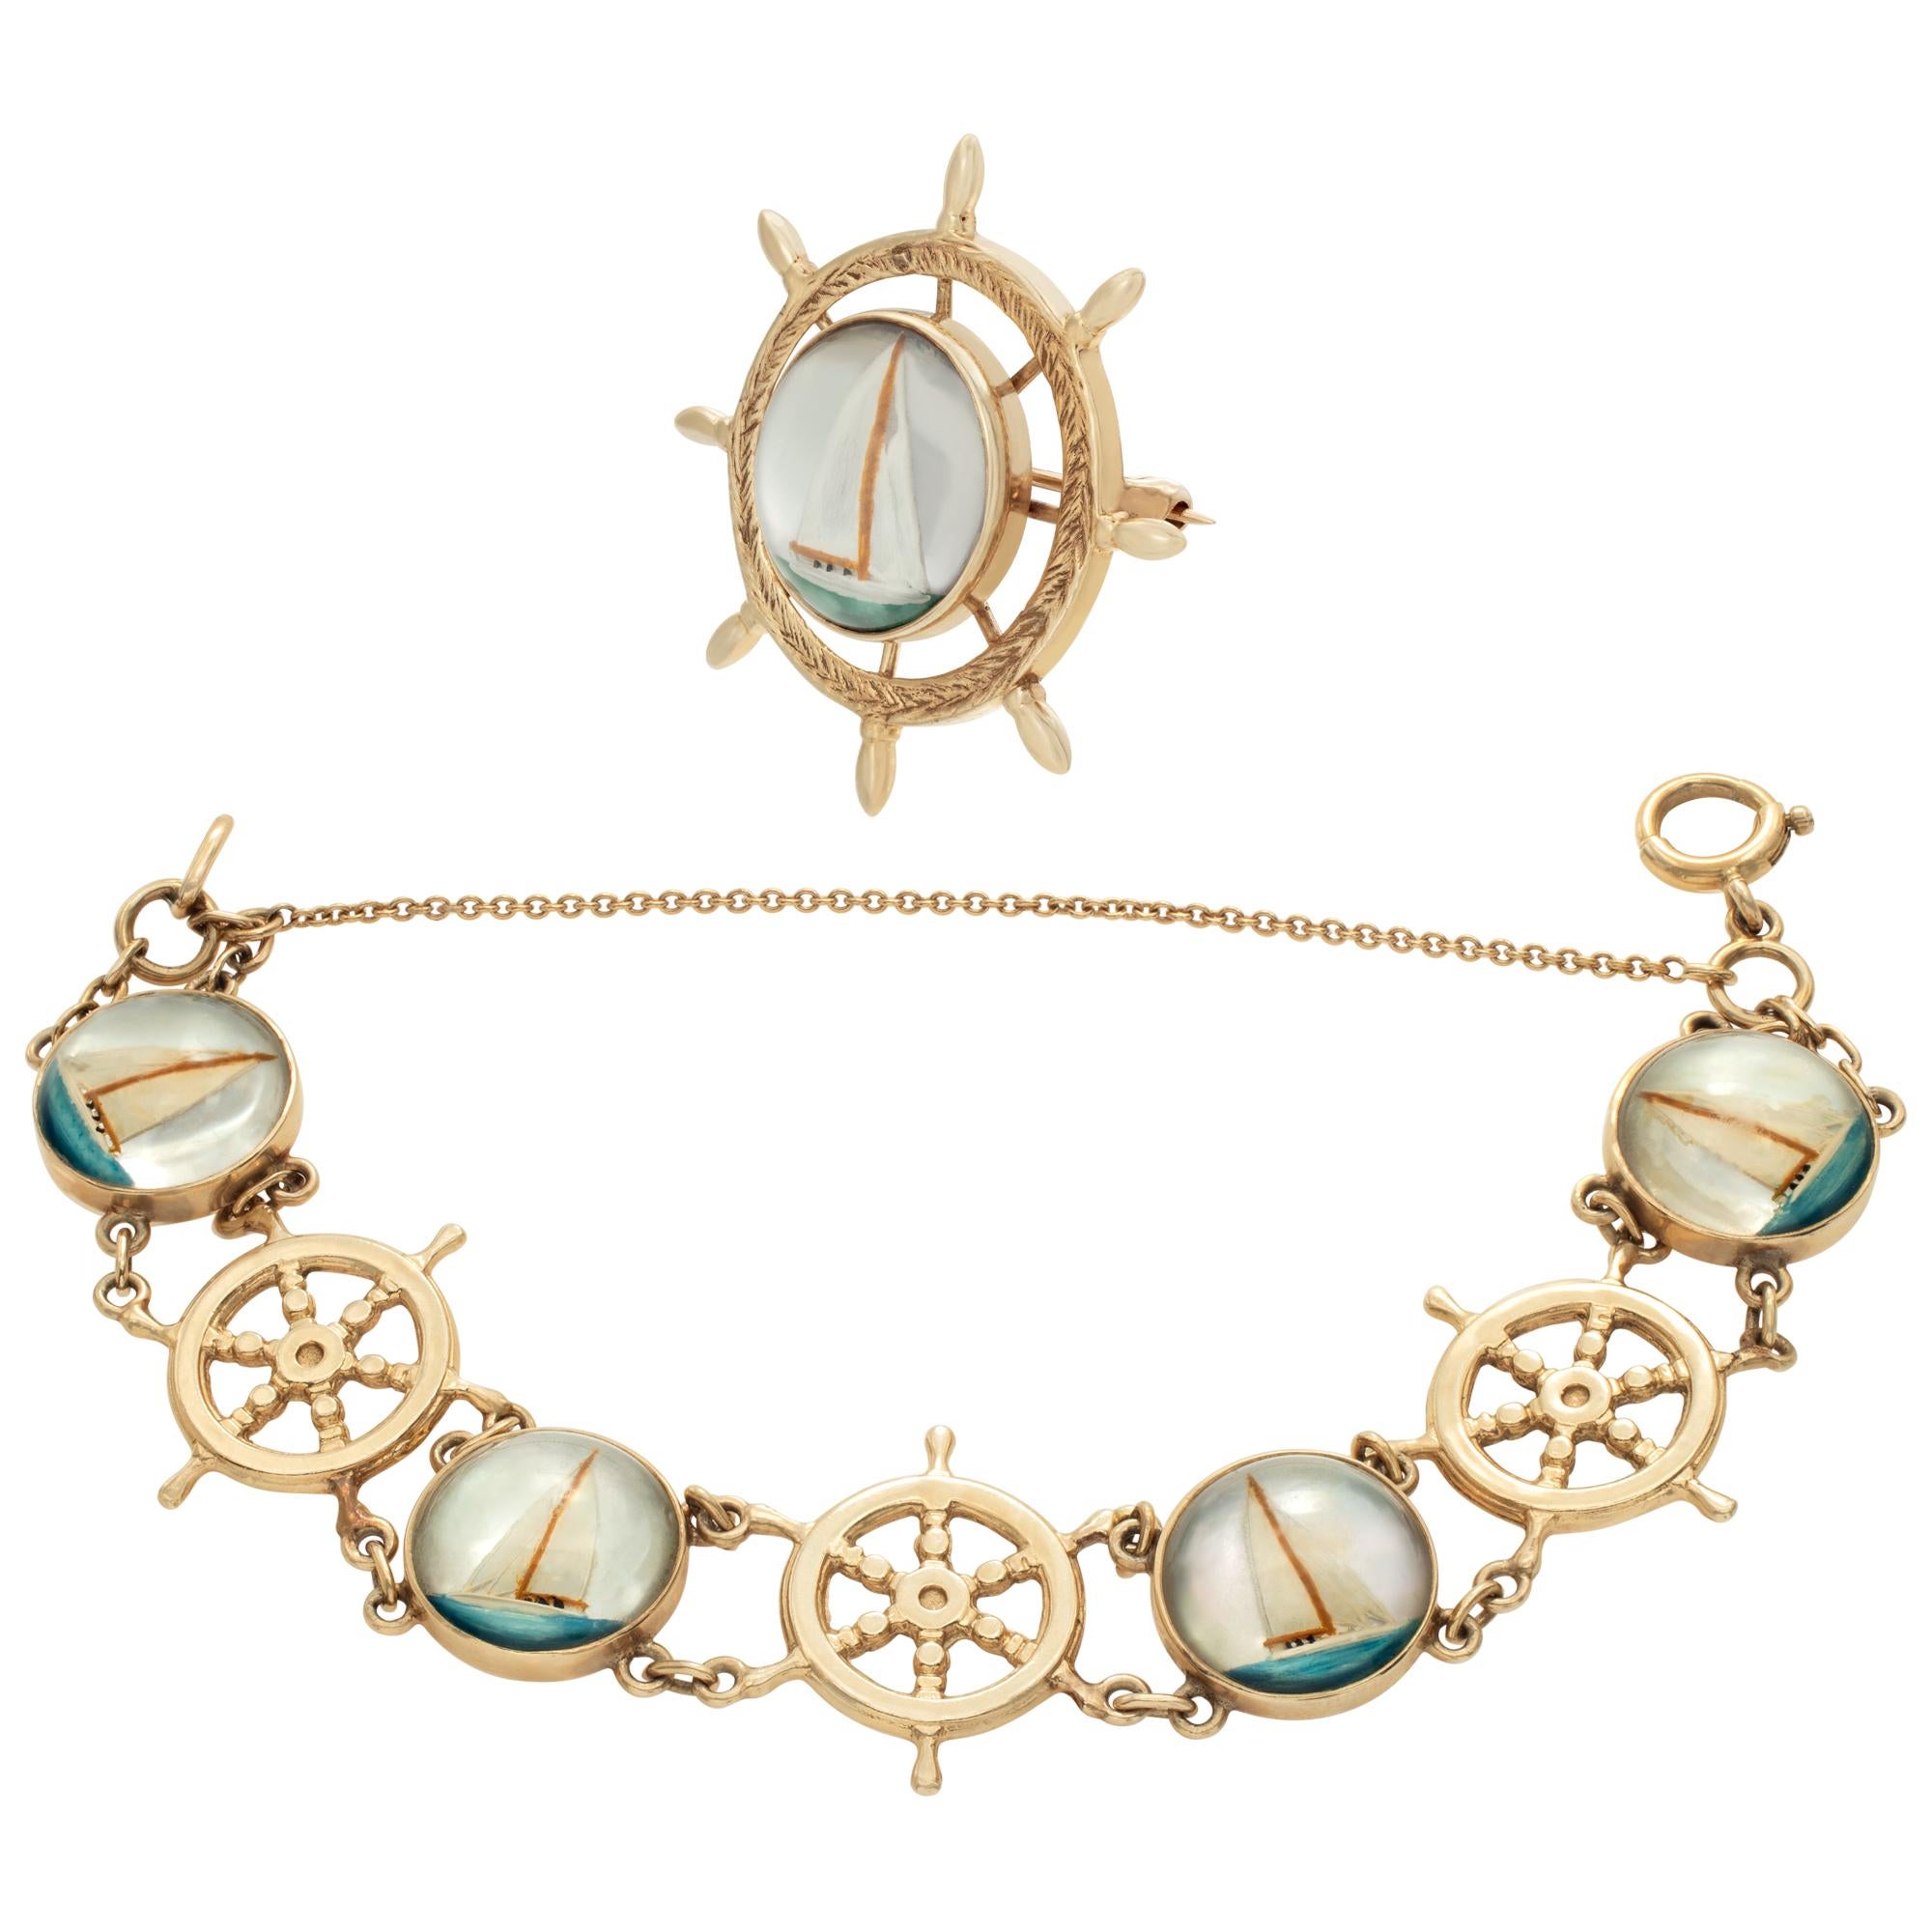 Edwardian square Reverse Intaglio Essex Crystal handpainted nautical bracelet & broach set, in 14k yellow gold. Bracelet will fit up to 7 inch wrist.